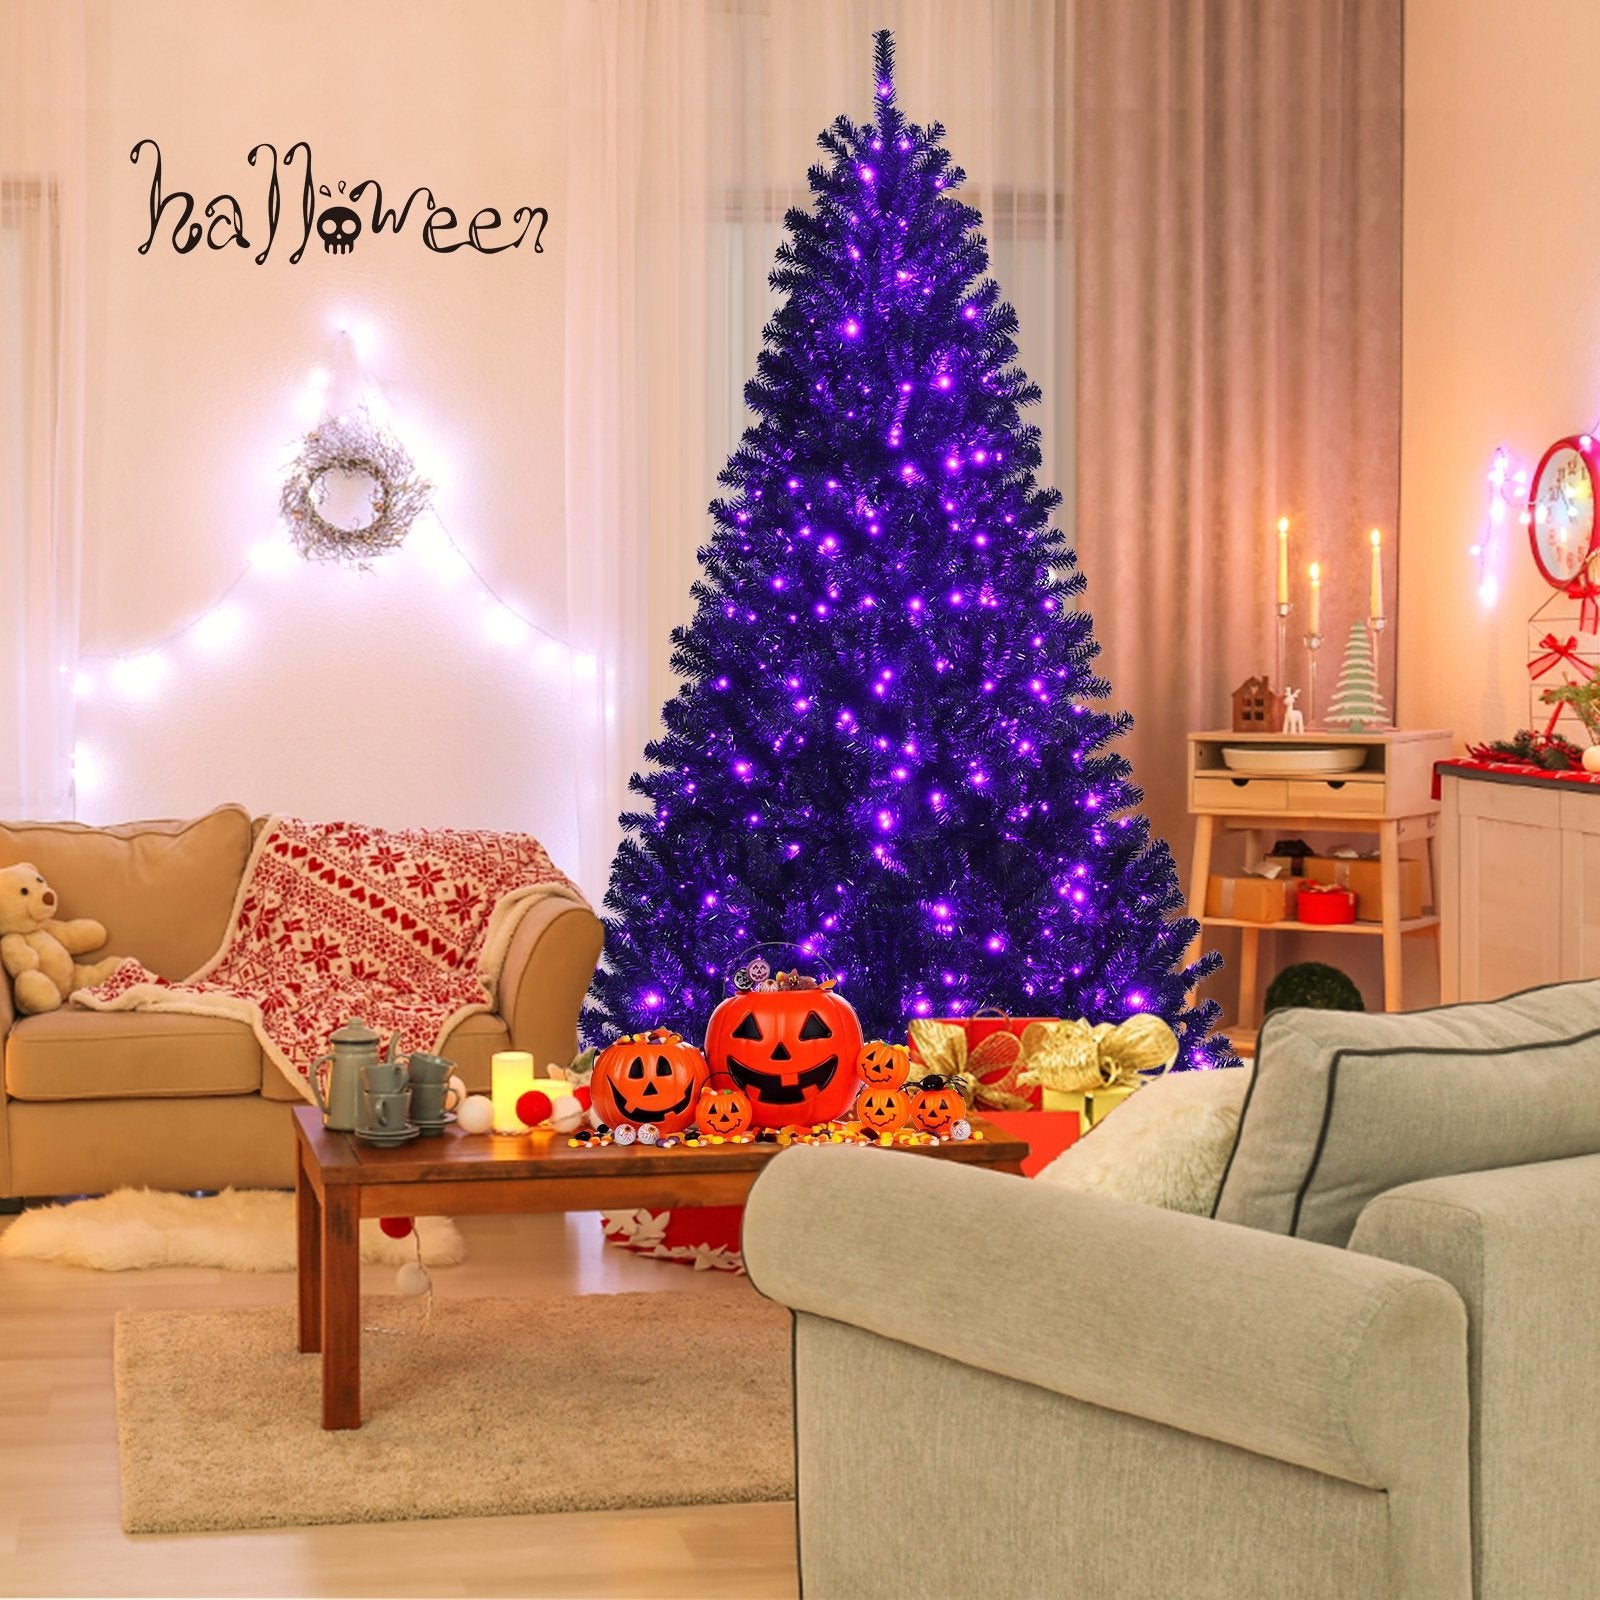 Black Artificial Christmas Halloween Tree with Purple LED Lights-7', Black - Gallery Canada